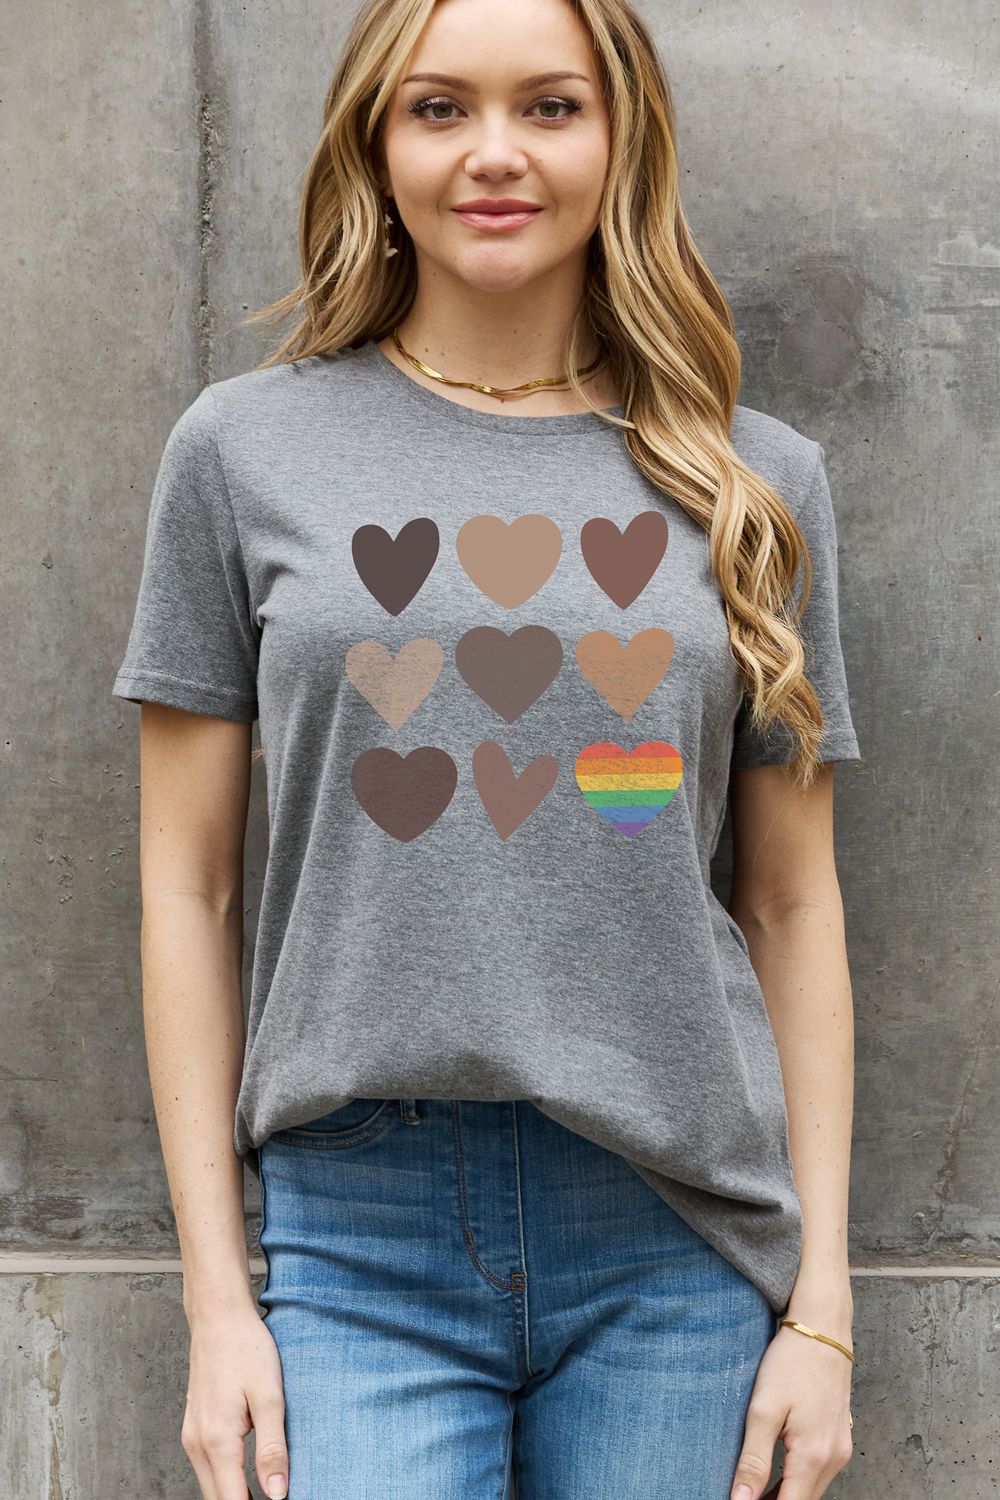 Full Size Heart Graphic Cotton Tee - Gray / S - T-Shirts - Shirts & Tops - 2 - 2024